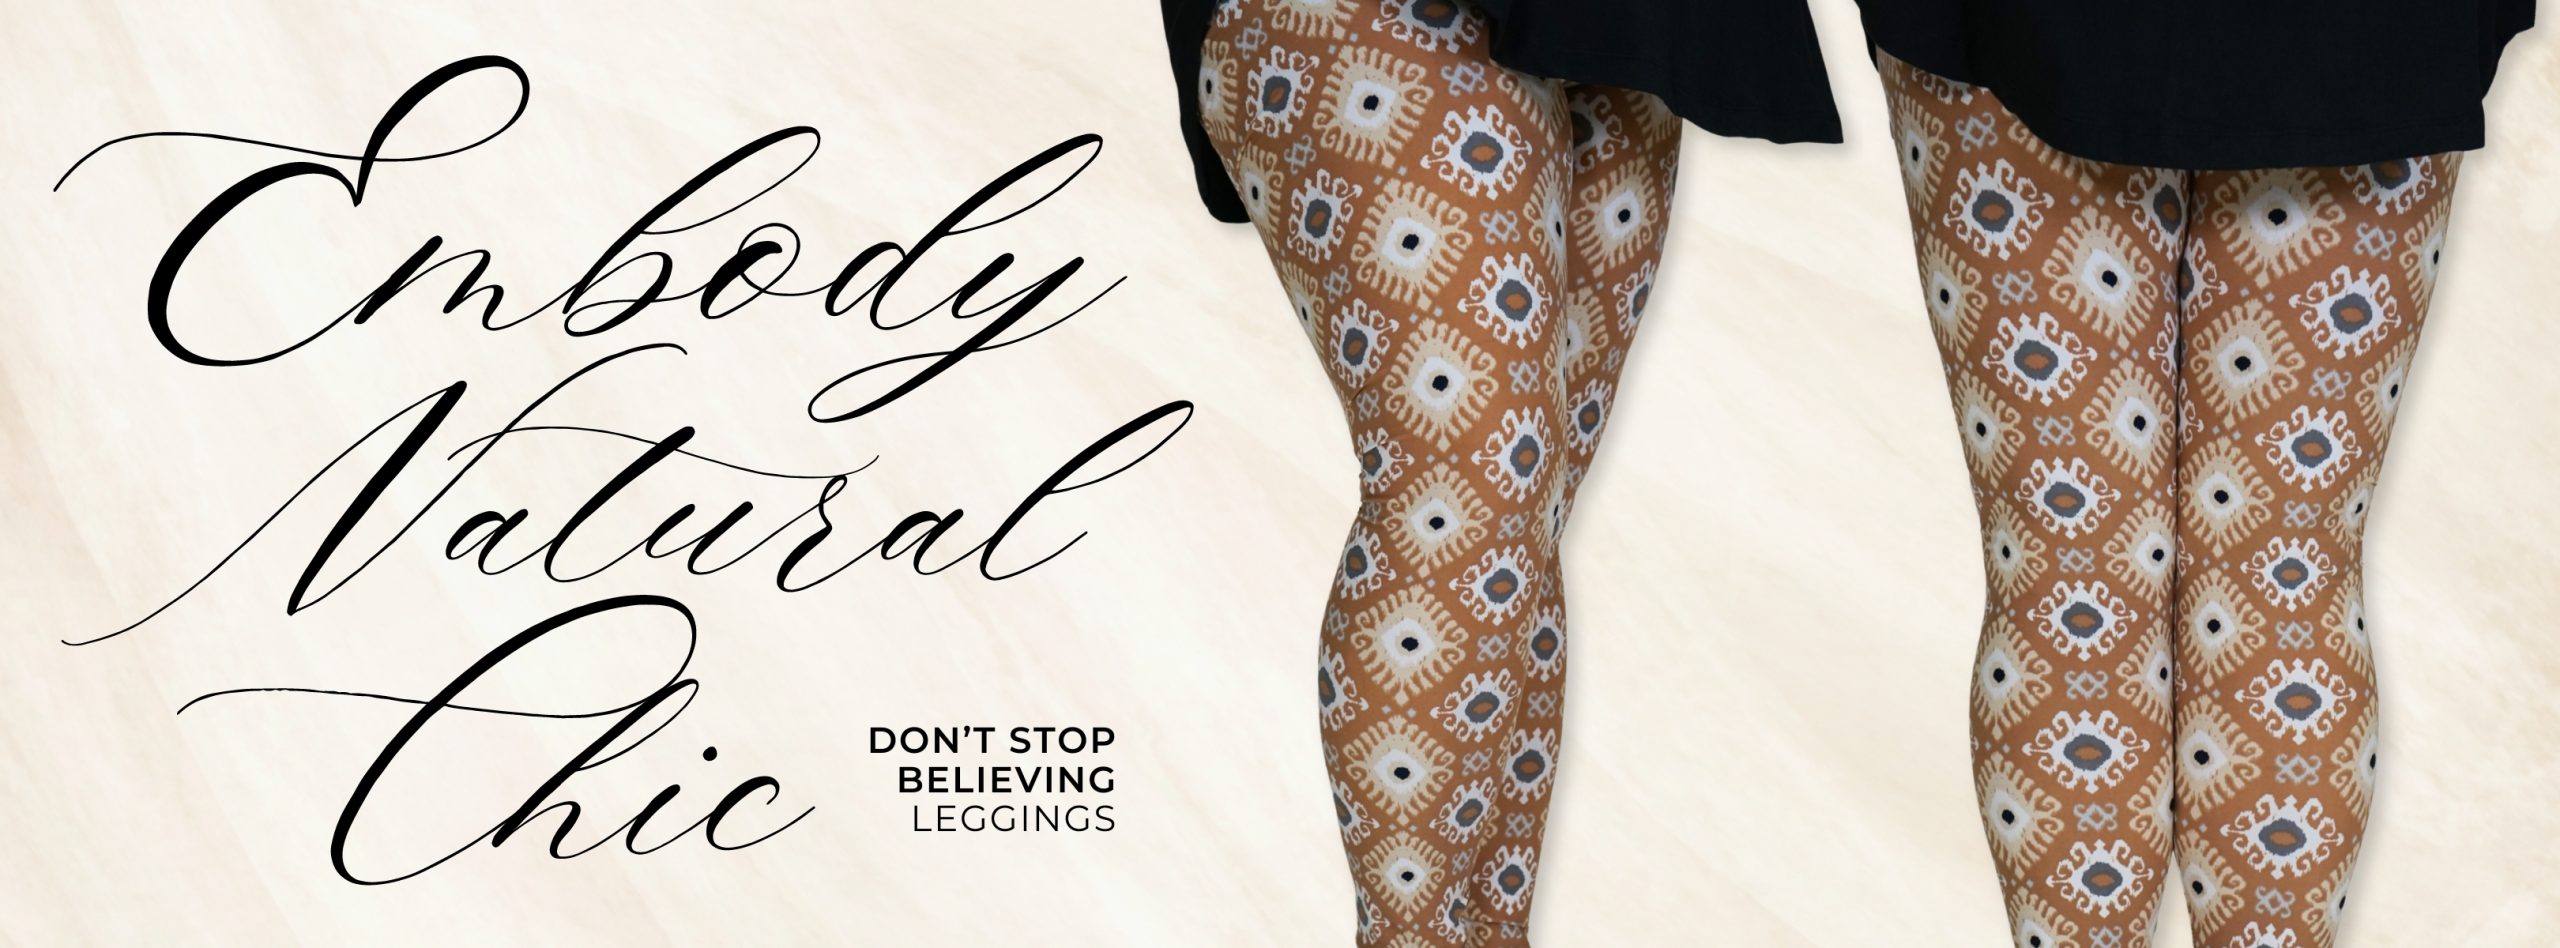 Banner showing our newest release: Don't Stop Believing Leggings. The text on the image says "Embody Natural Chic"